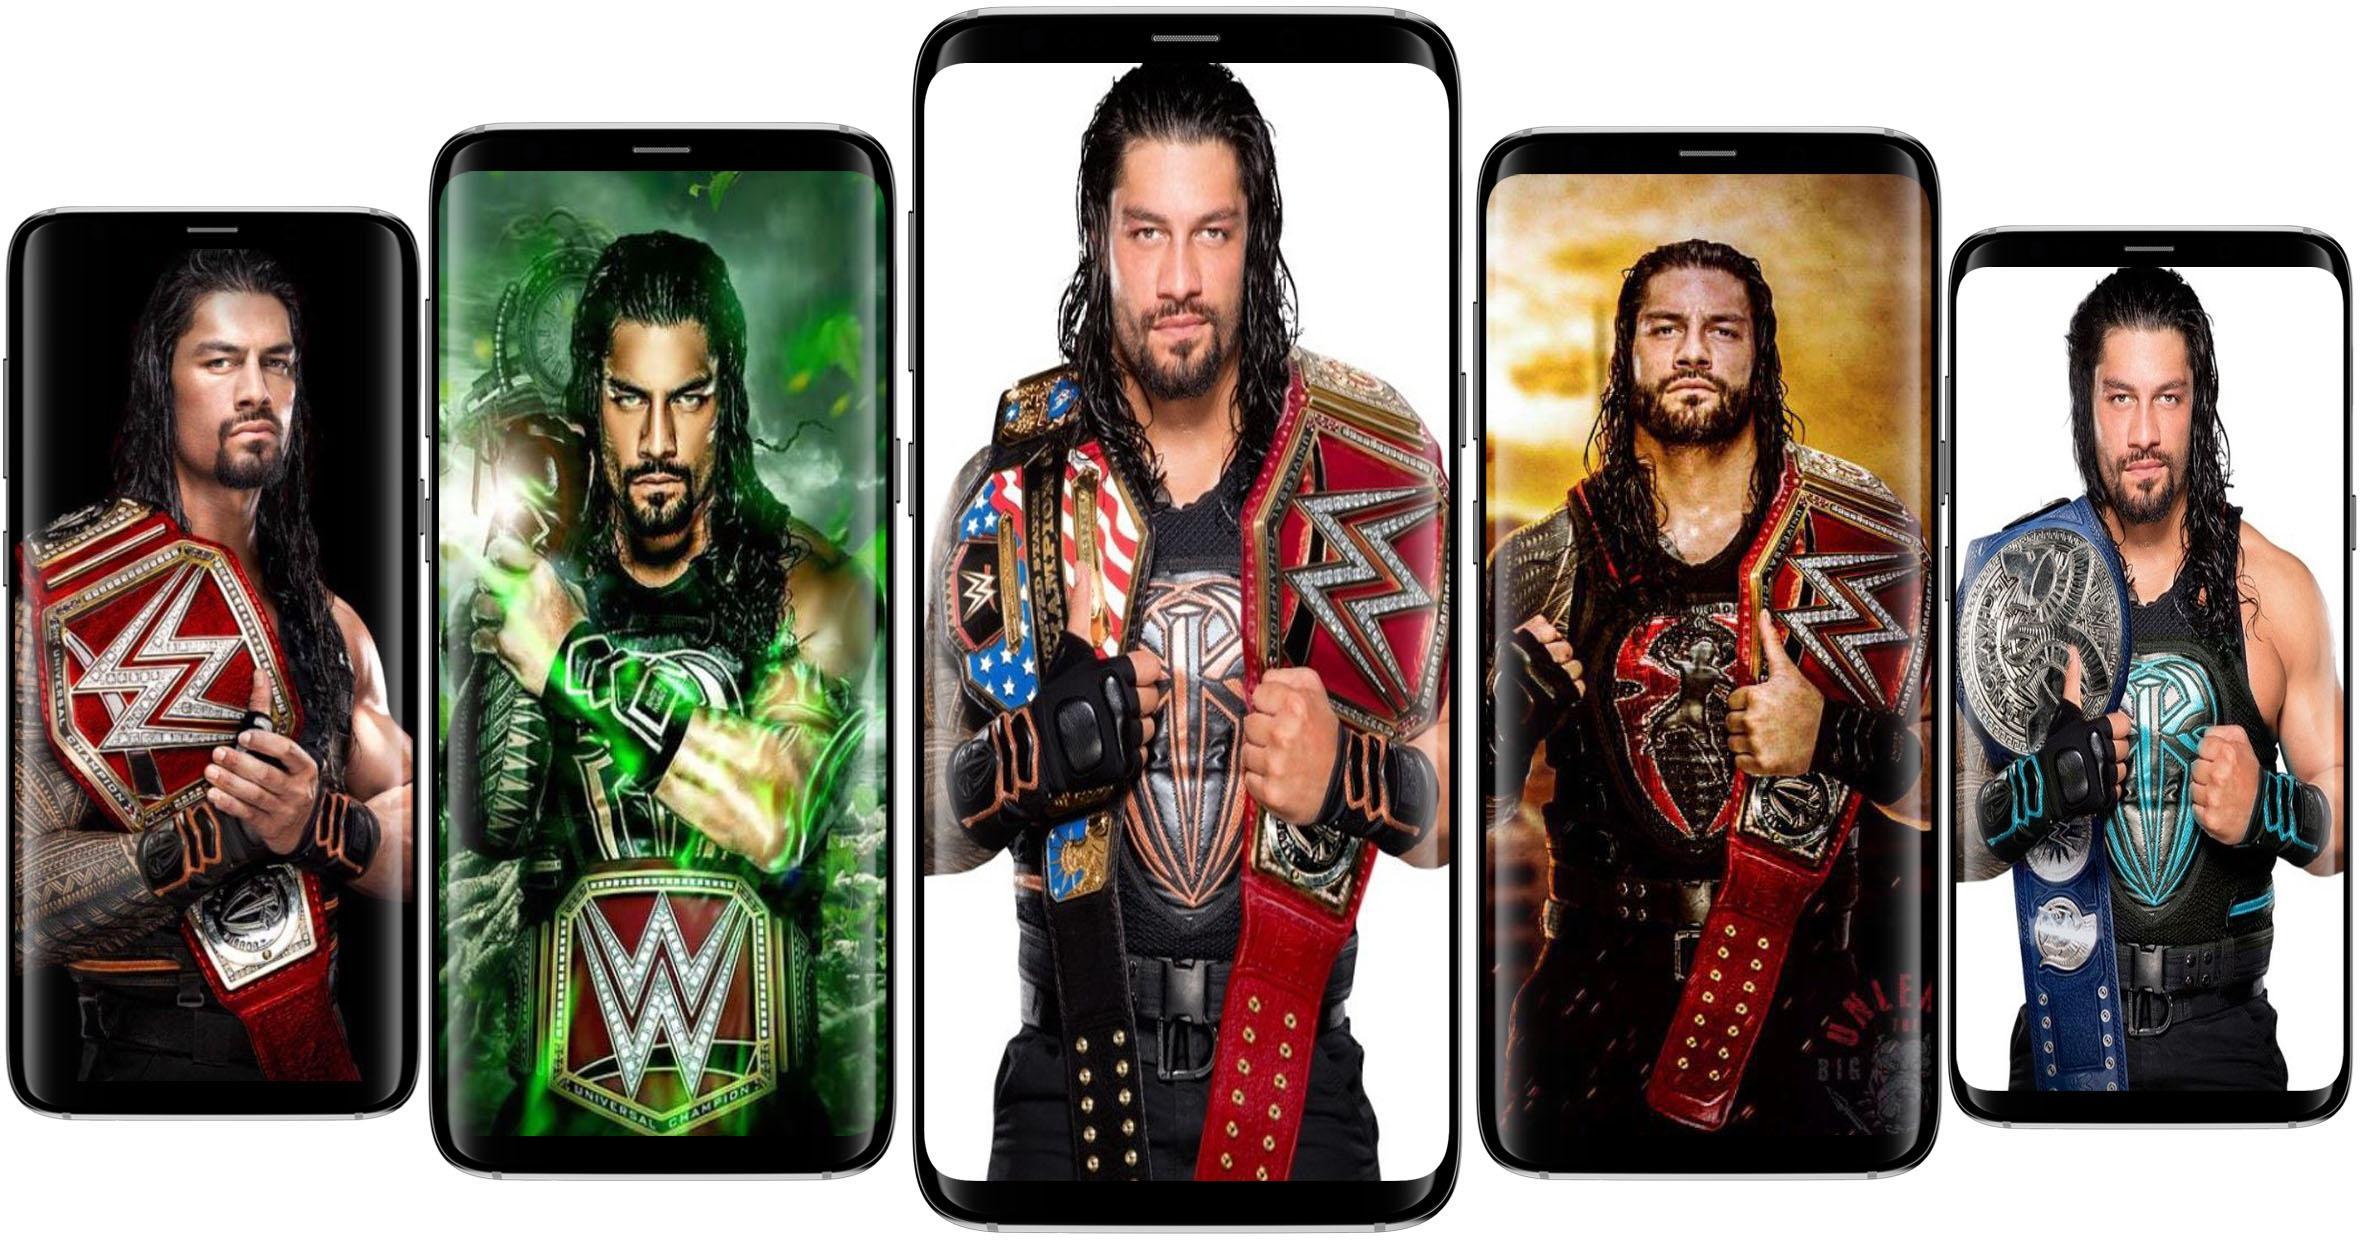 Roman Reigns Wwe Wallpaper Hd For Android Apk Download